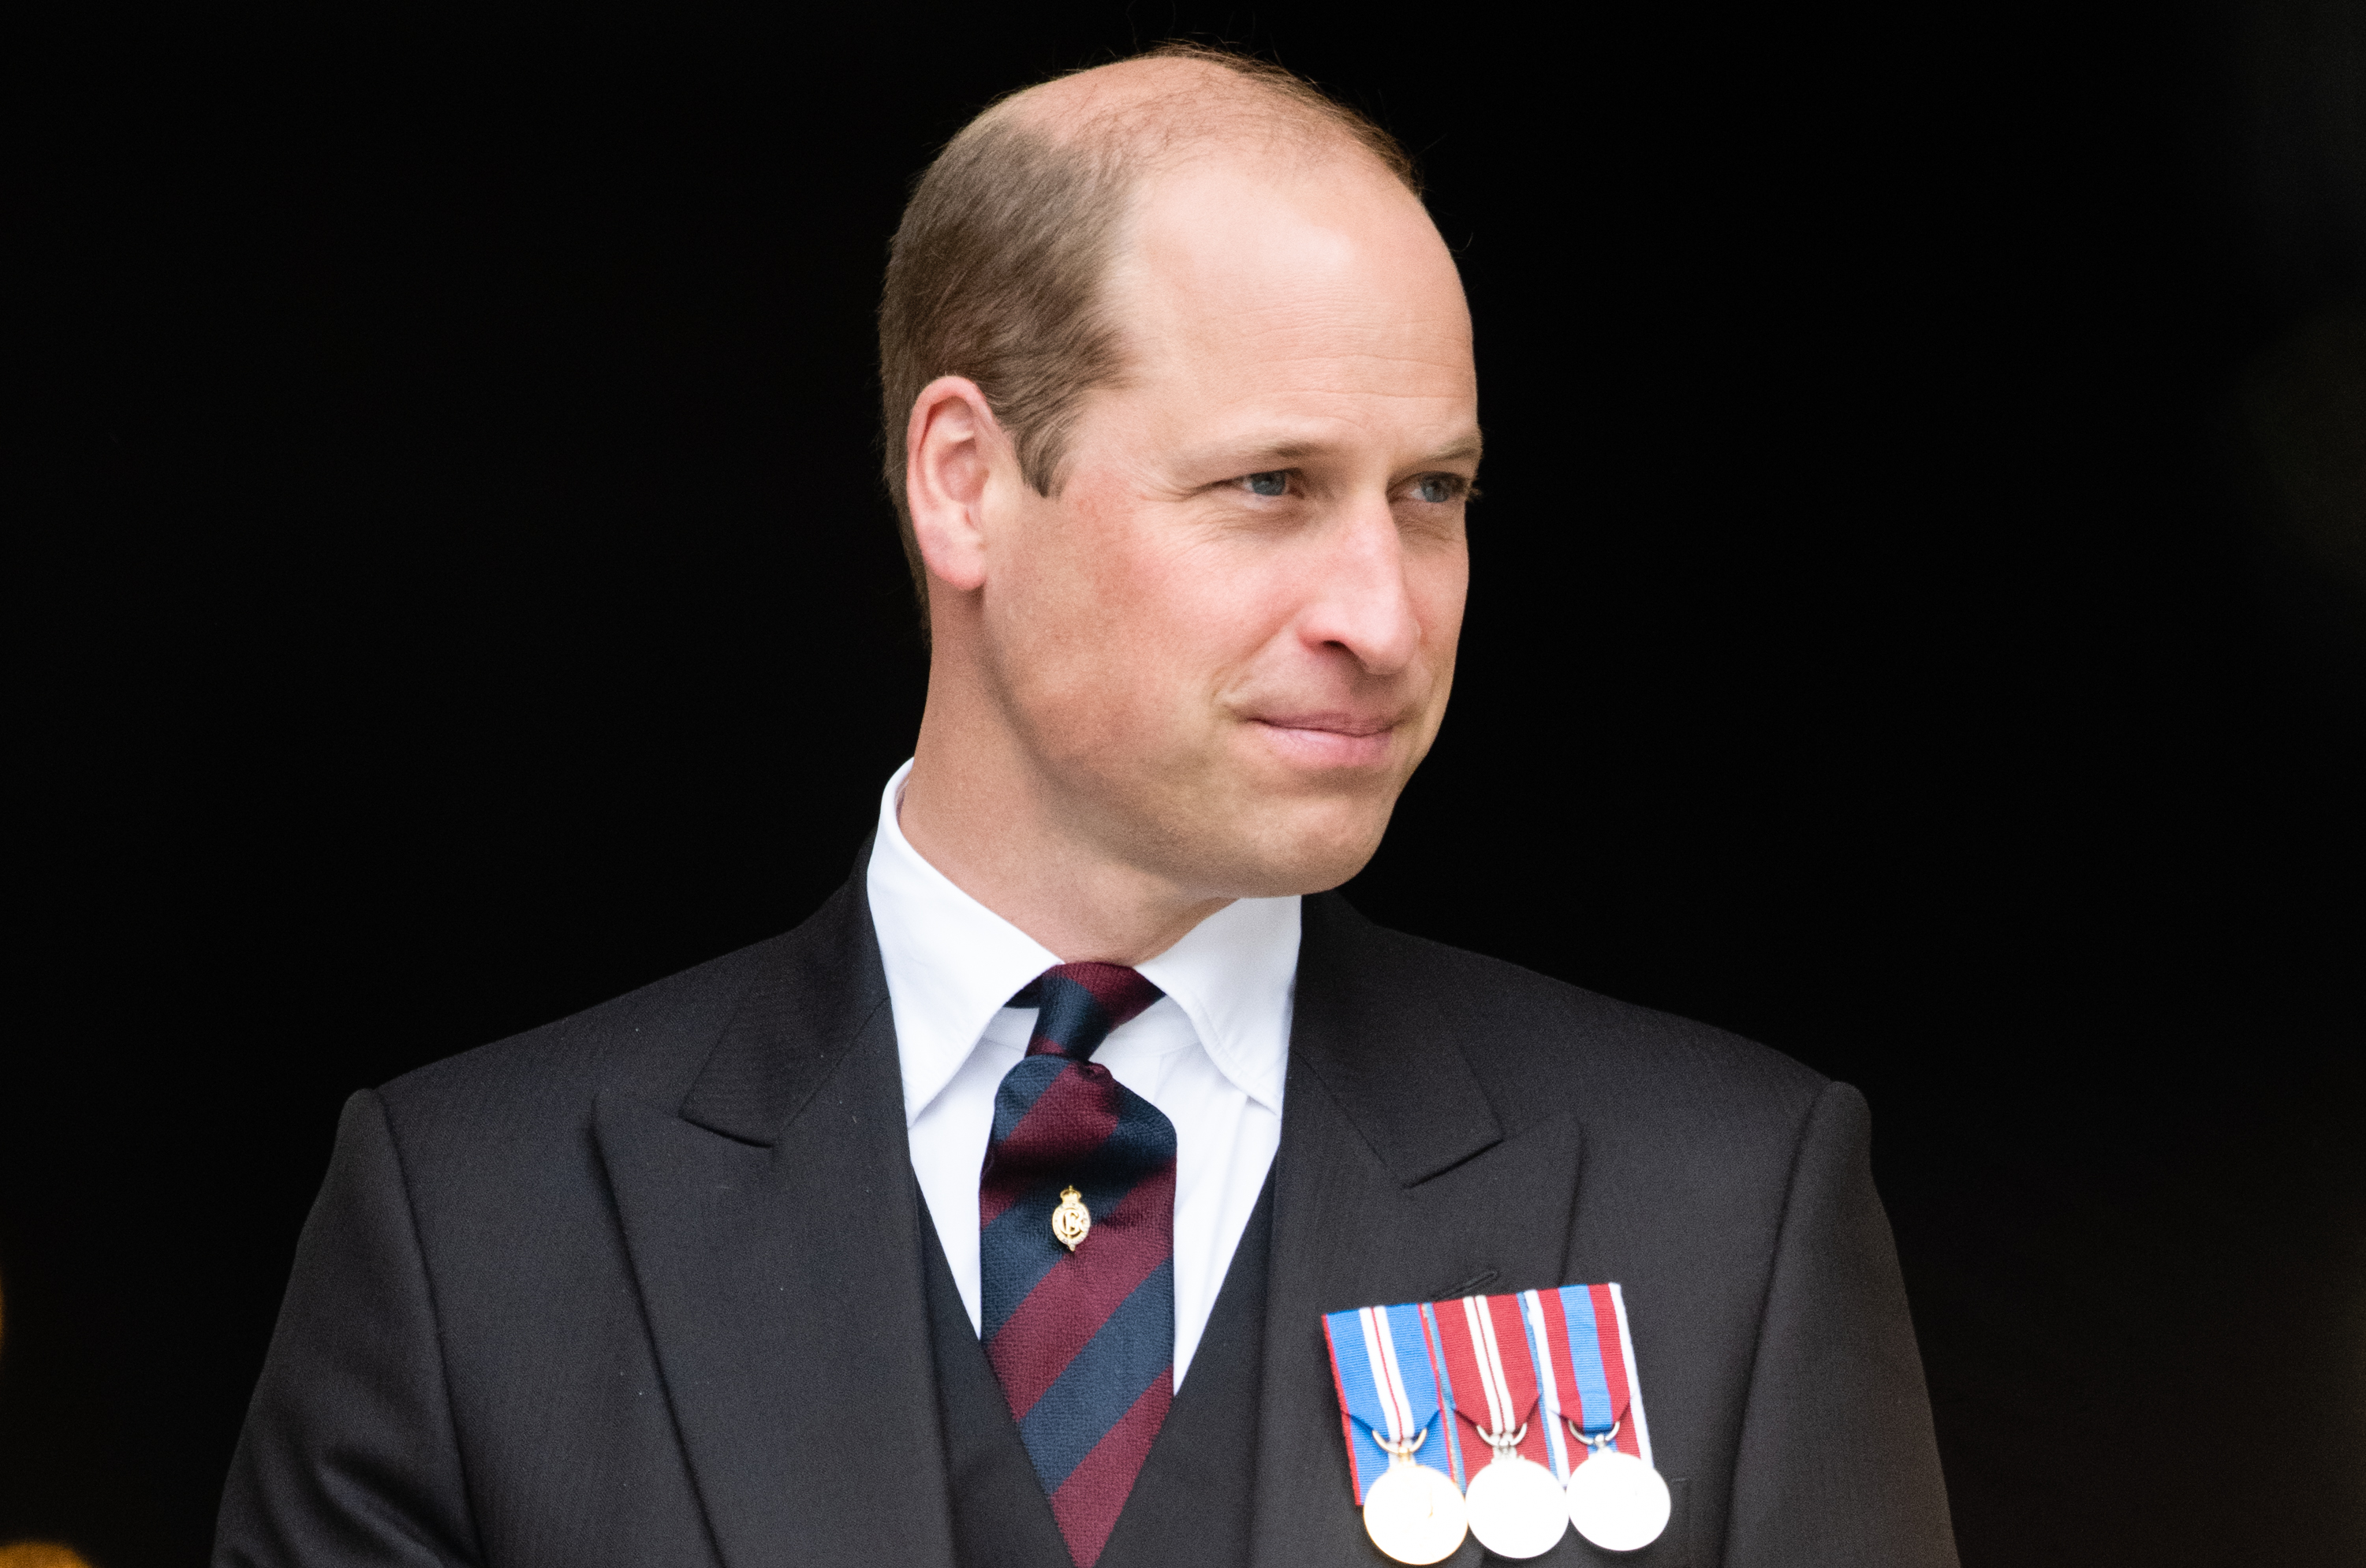 Prince William at St Paul's Cathedral in London, England on June 3.